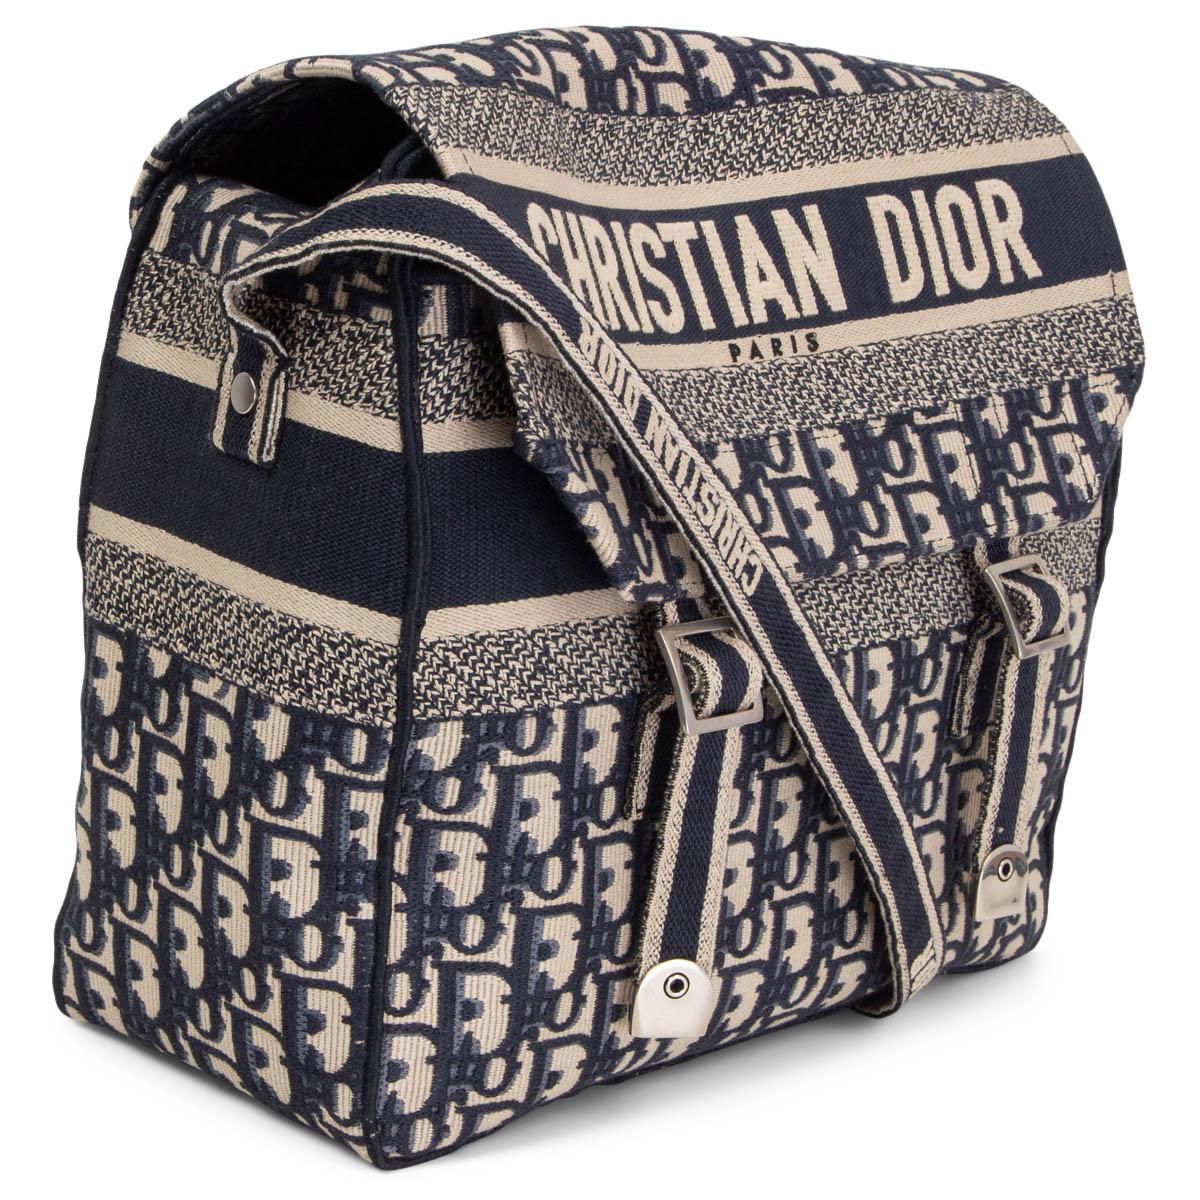 100% authentic Christian Dior Diorcamp Oblique Embroidery Bag in beige canvas embroidered with the blue Dior Oblique motif, and is enhanced by a 'CHRISTIAN DIOR' signature across the front. Featuring an adjustable shoulder strap, the messenger bag